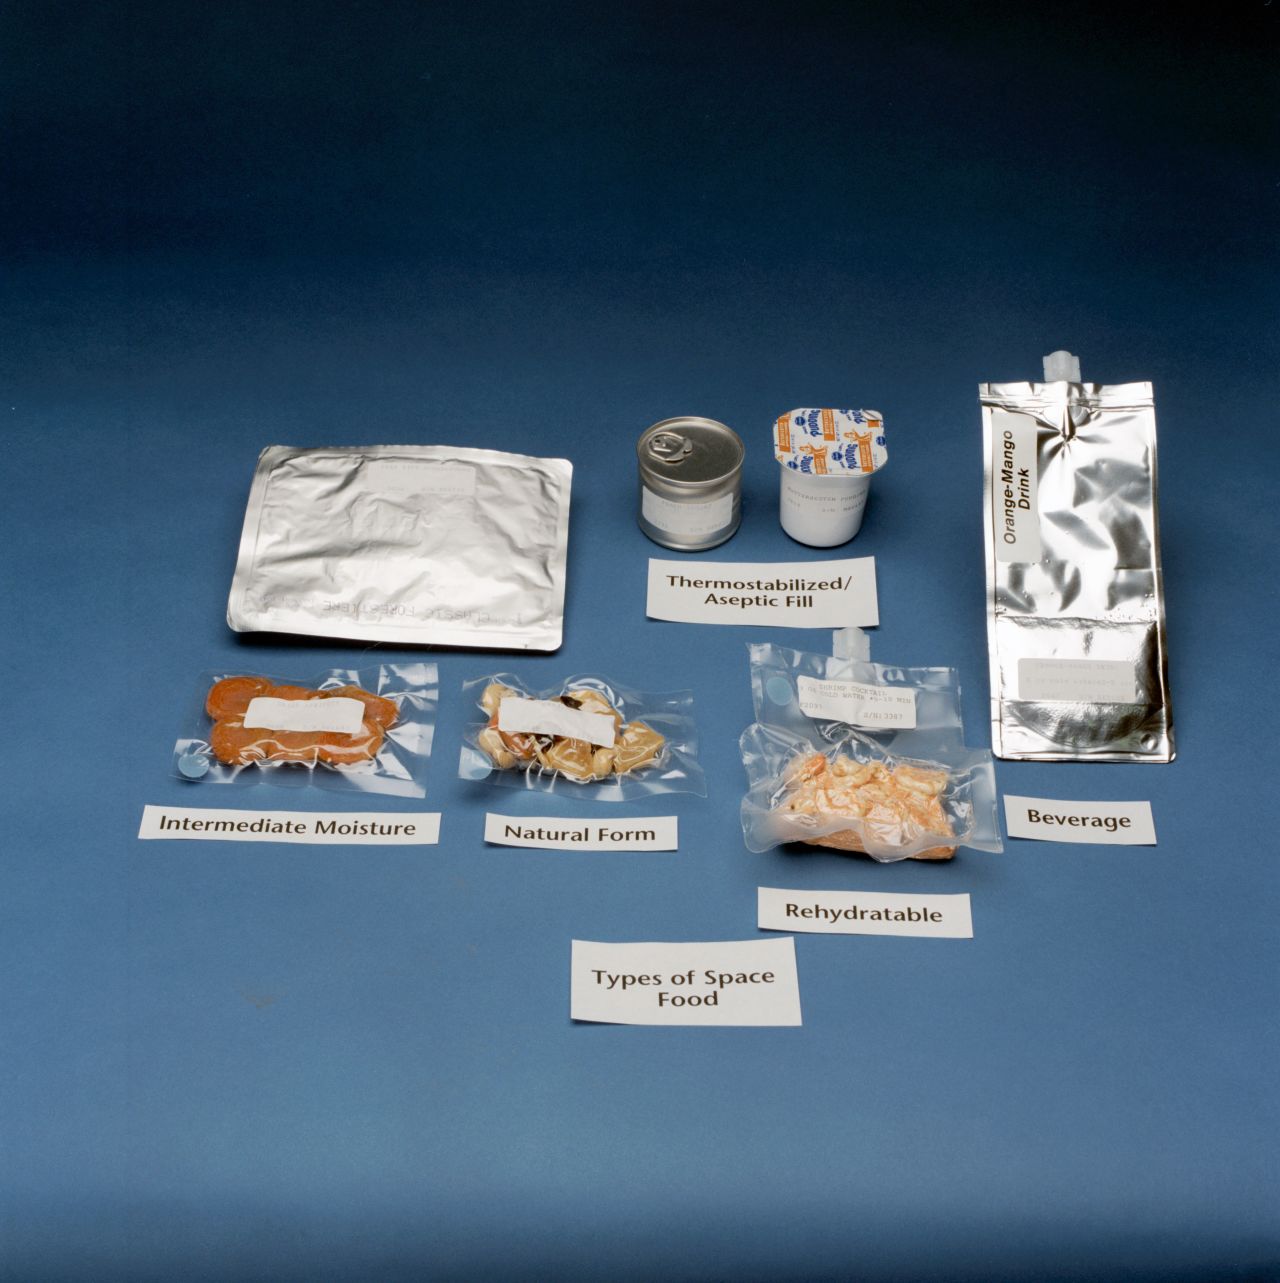 Space Shuttle astronaut diets were designed to supply each crew member with all the recommended dietary allowances of vitamins and minerals necessary to perform in the environment of space. Food shown here includes packaged orange-mango beverage and rehydratable shrimp cocktail.